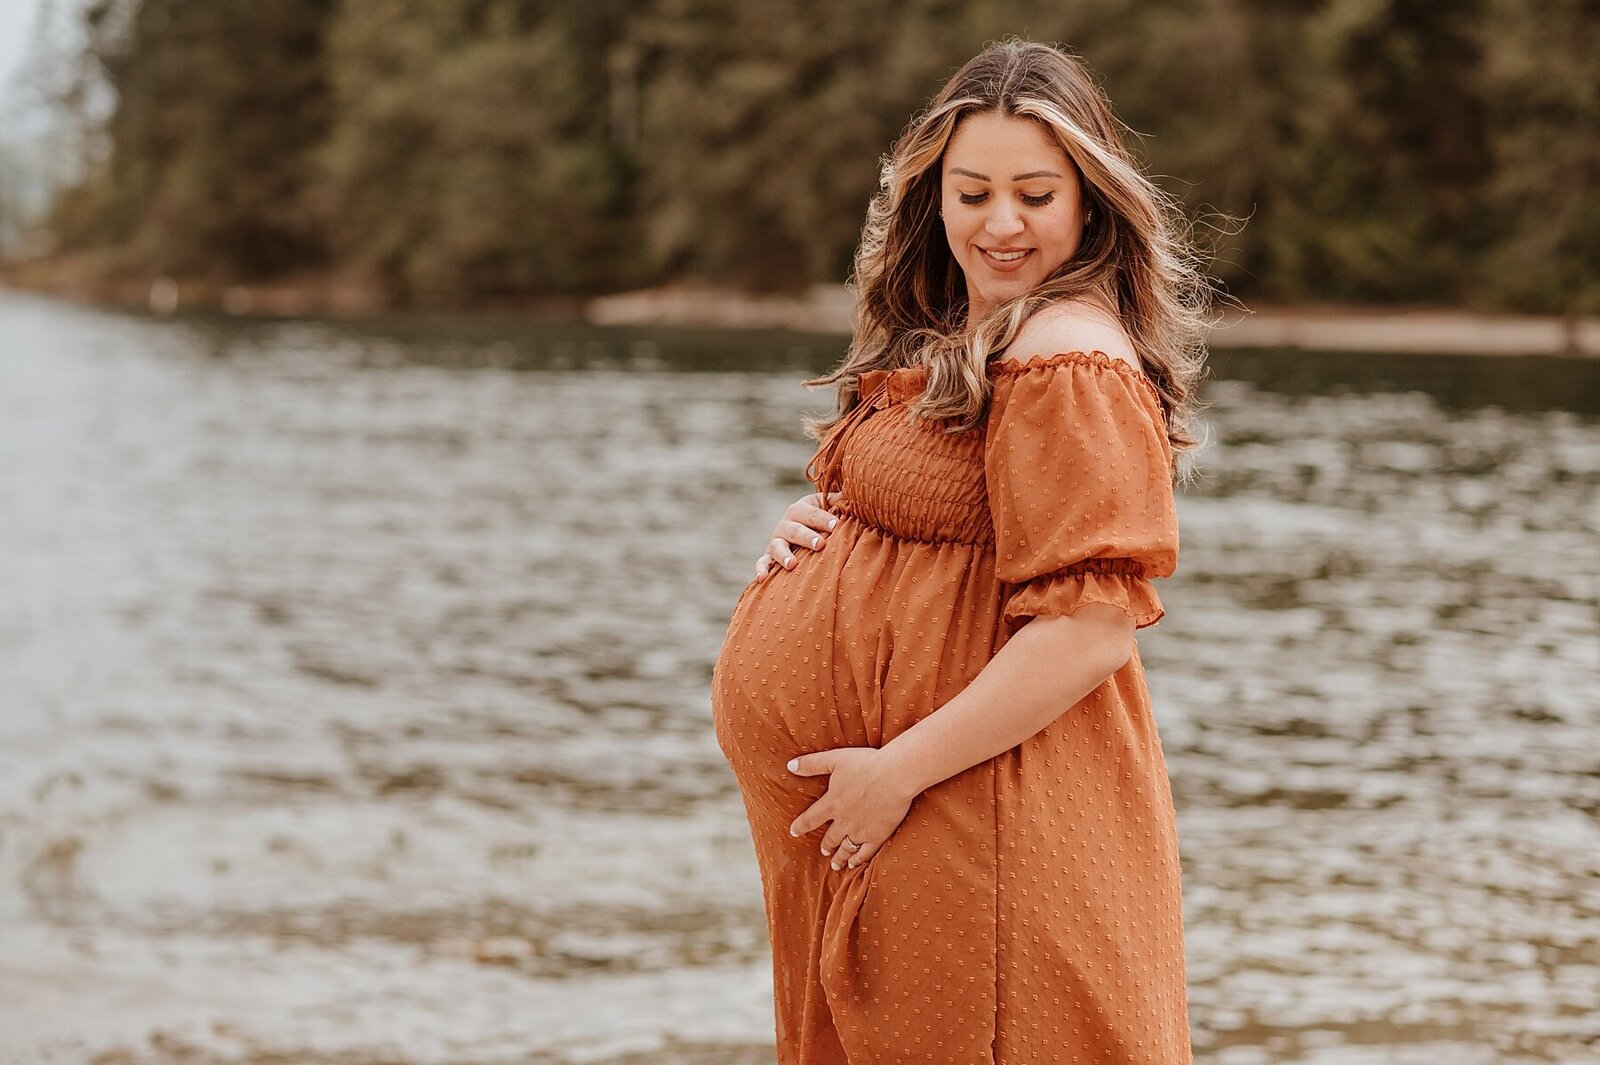 Vancouver Maternity Clothes - Kindred Photography